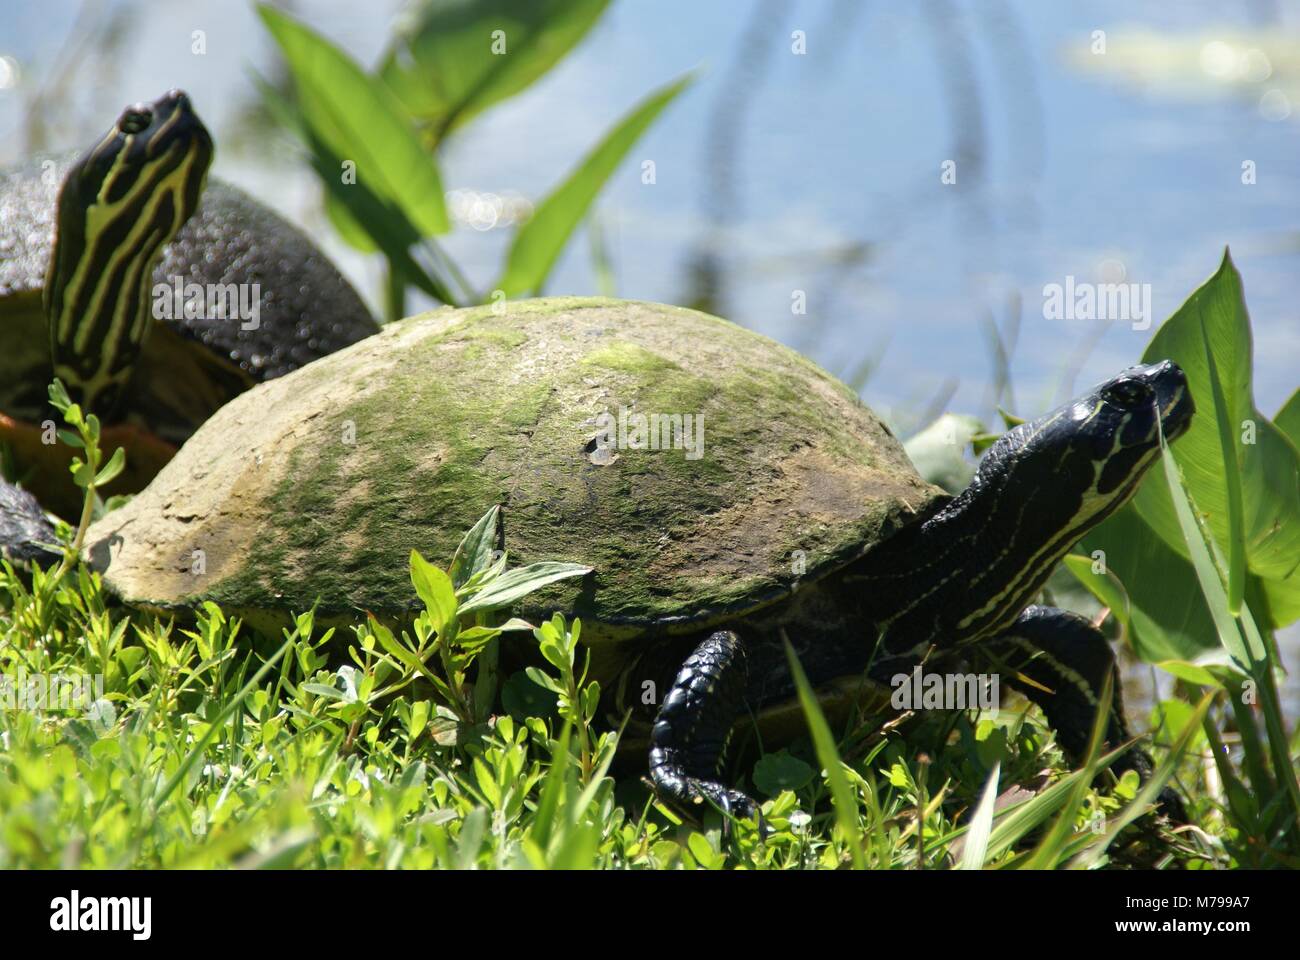 Florida red-bellied cooter or Florida redbelly turtle in everglades florida US Stock Photo